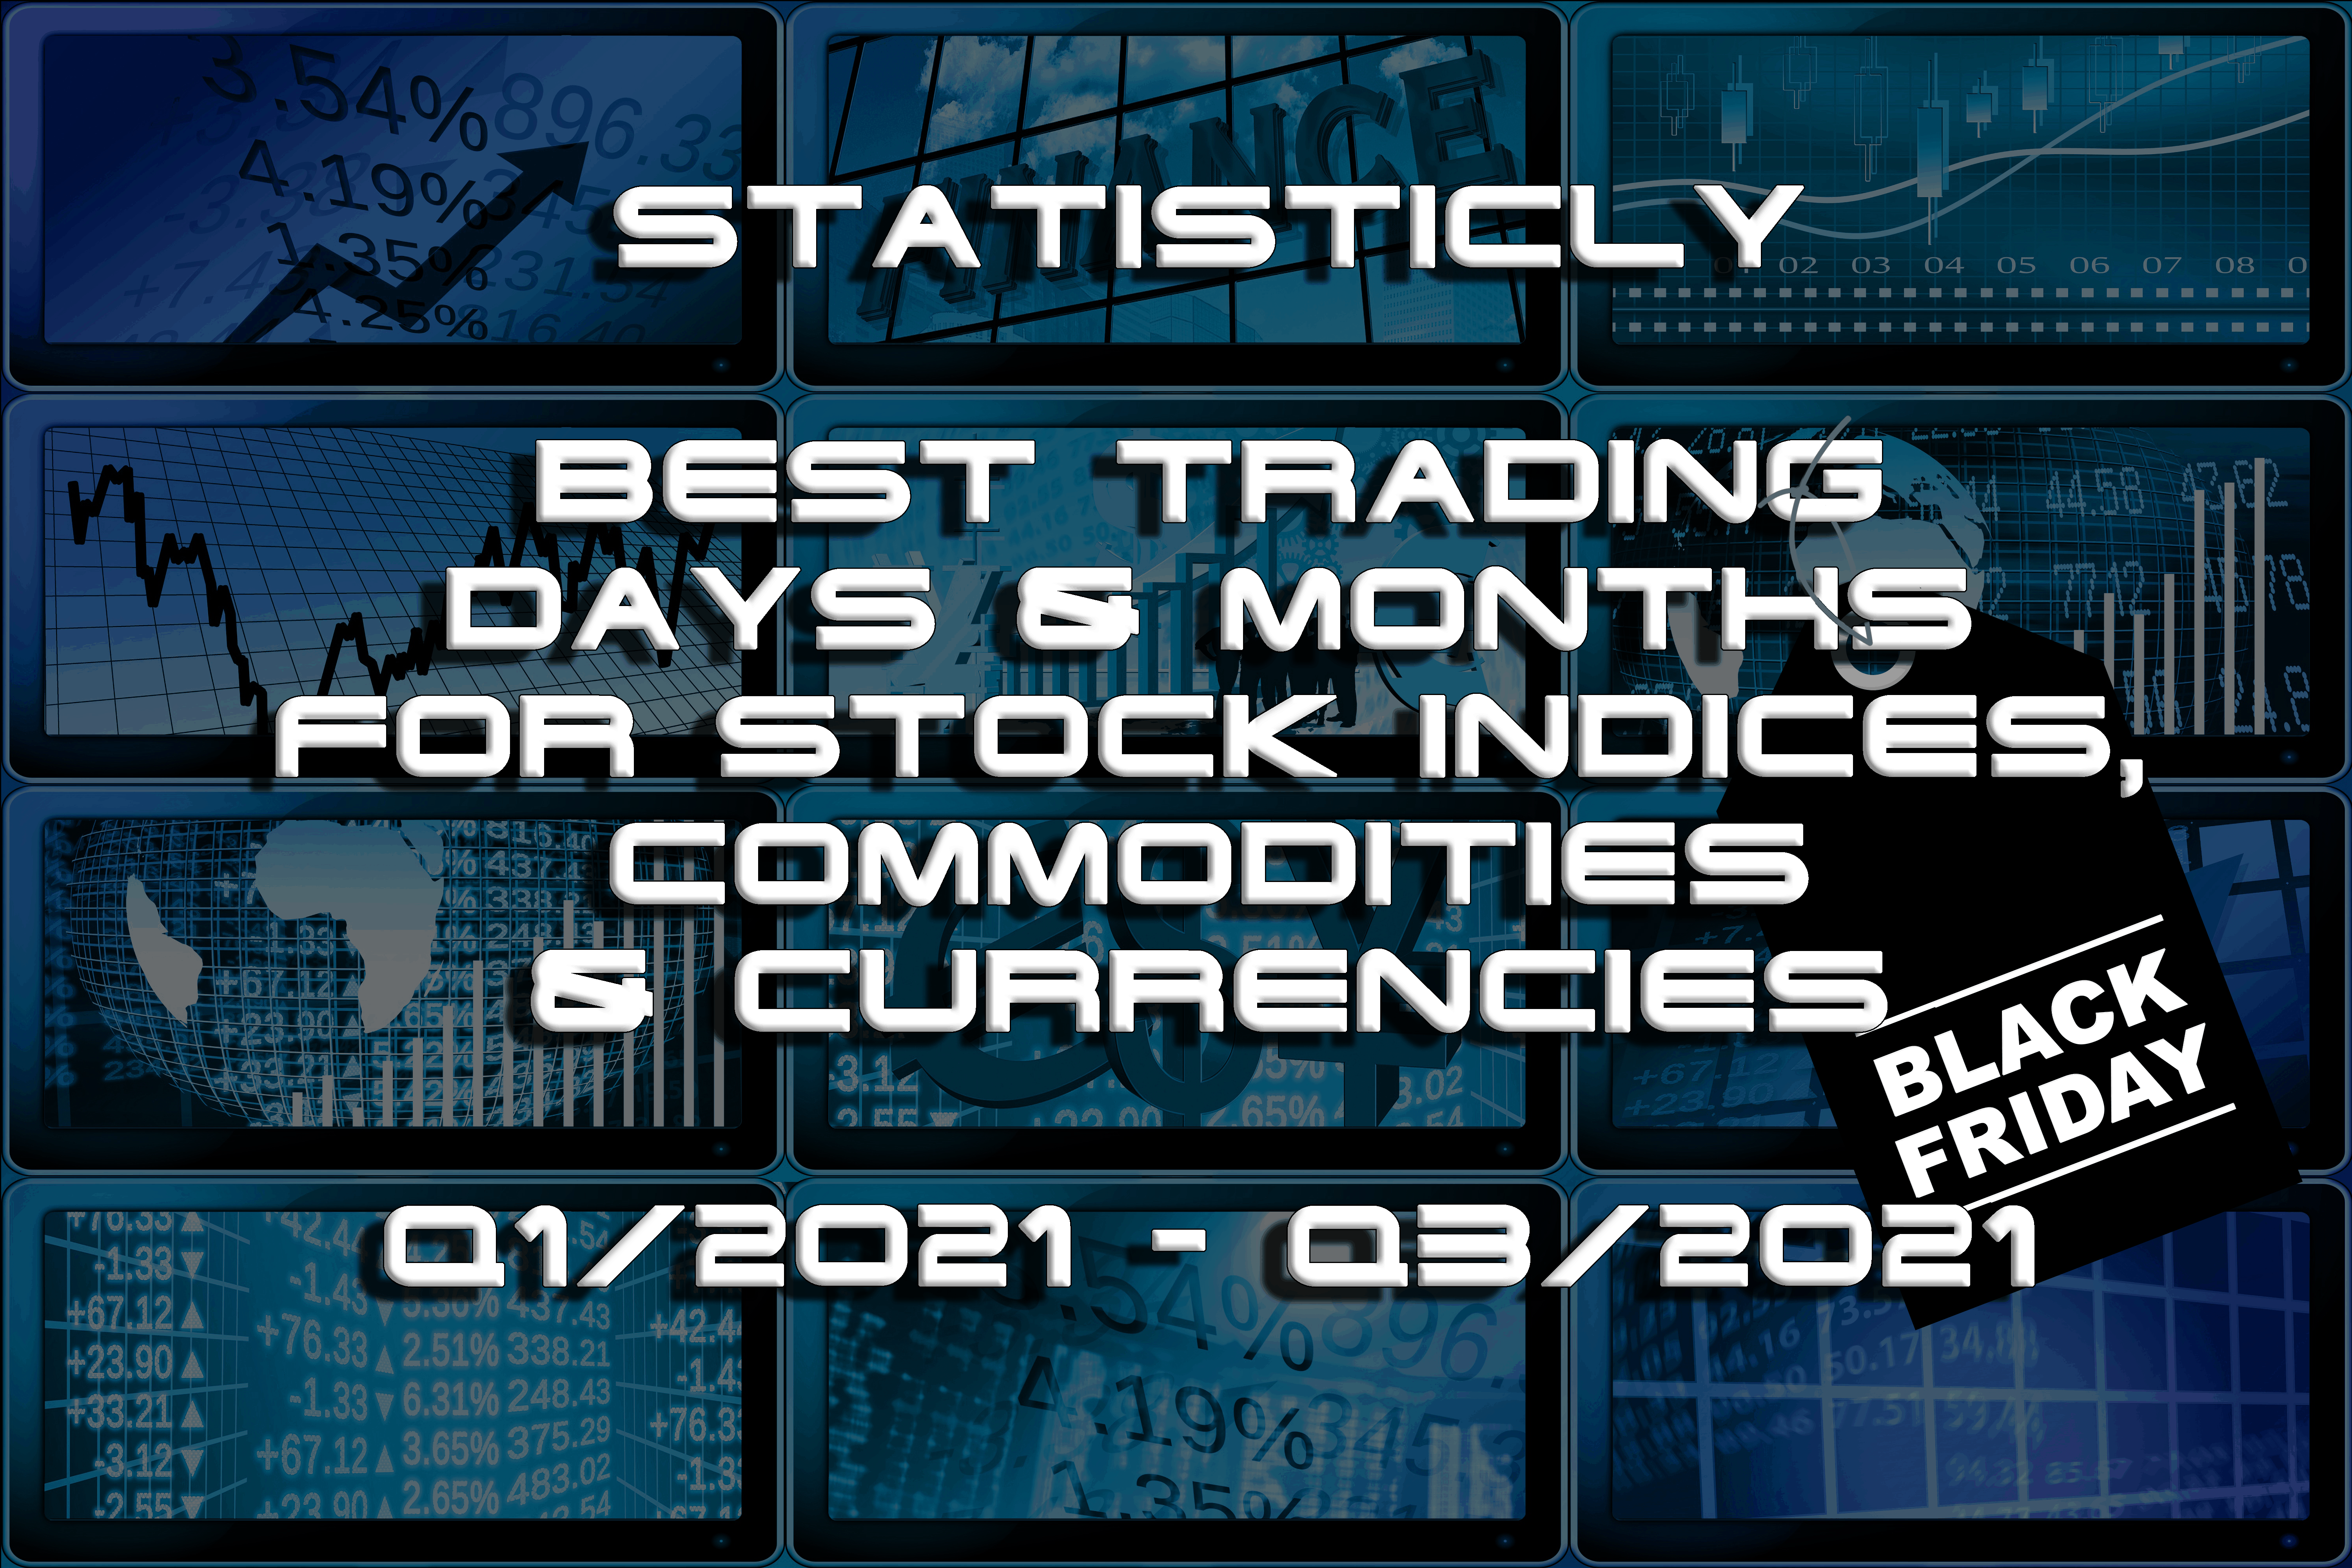 statisticly best trading days & months in a year for Q1/2021 - Q3/2021 [BLACK FRIDAY BUNDLE]